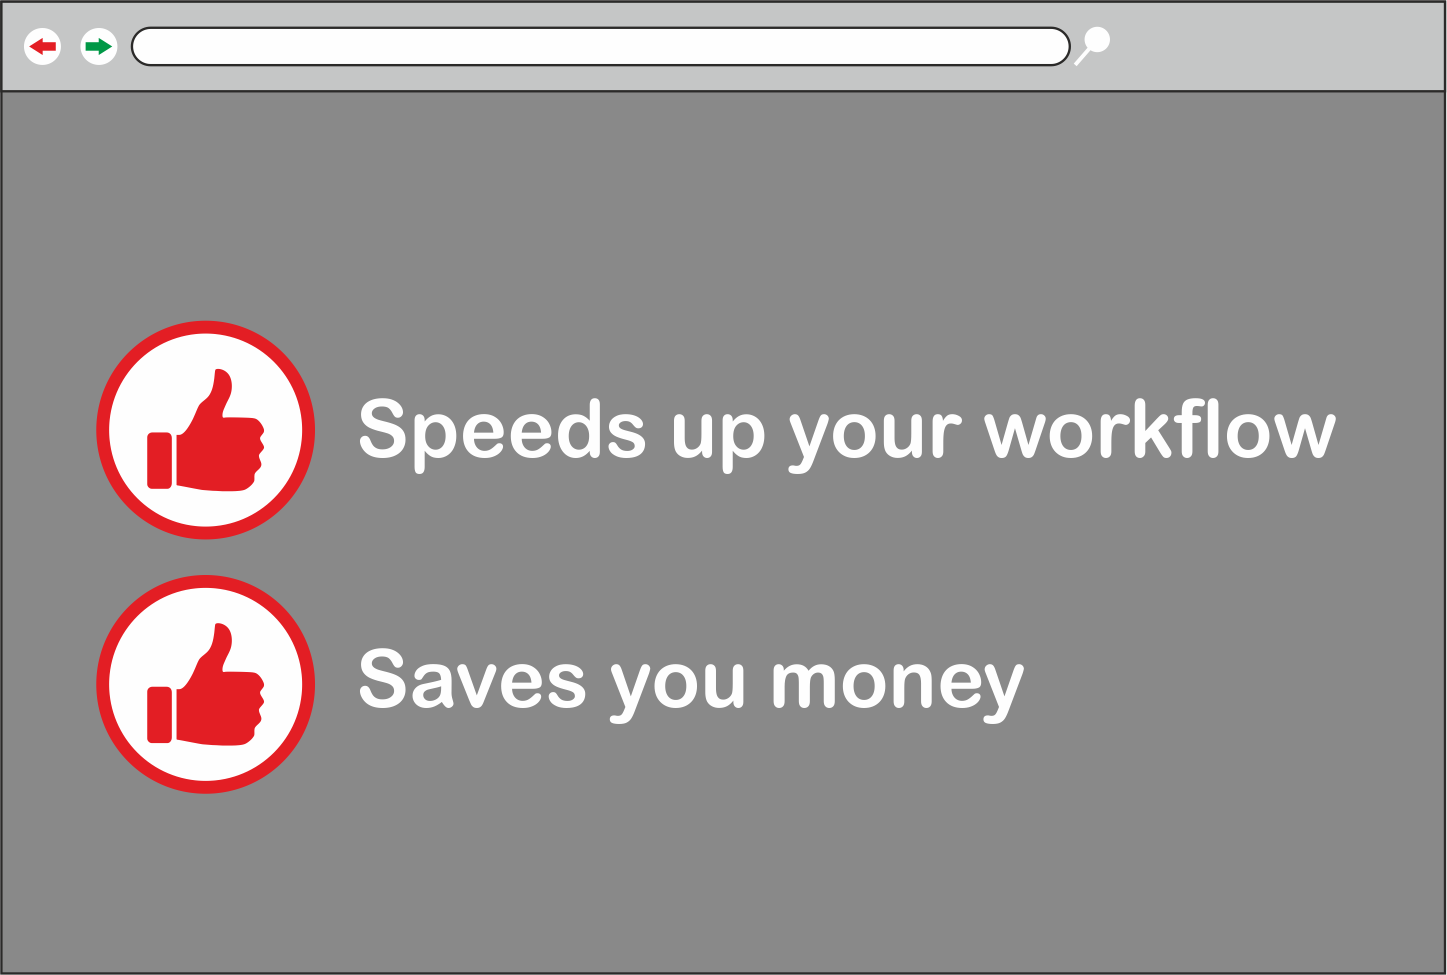 Speeds up ypur workflow - saves you money